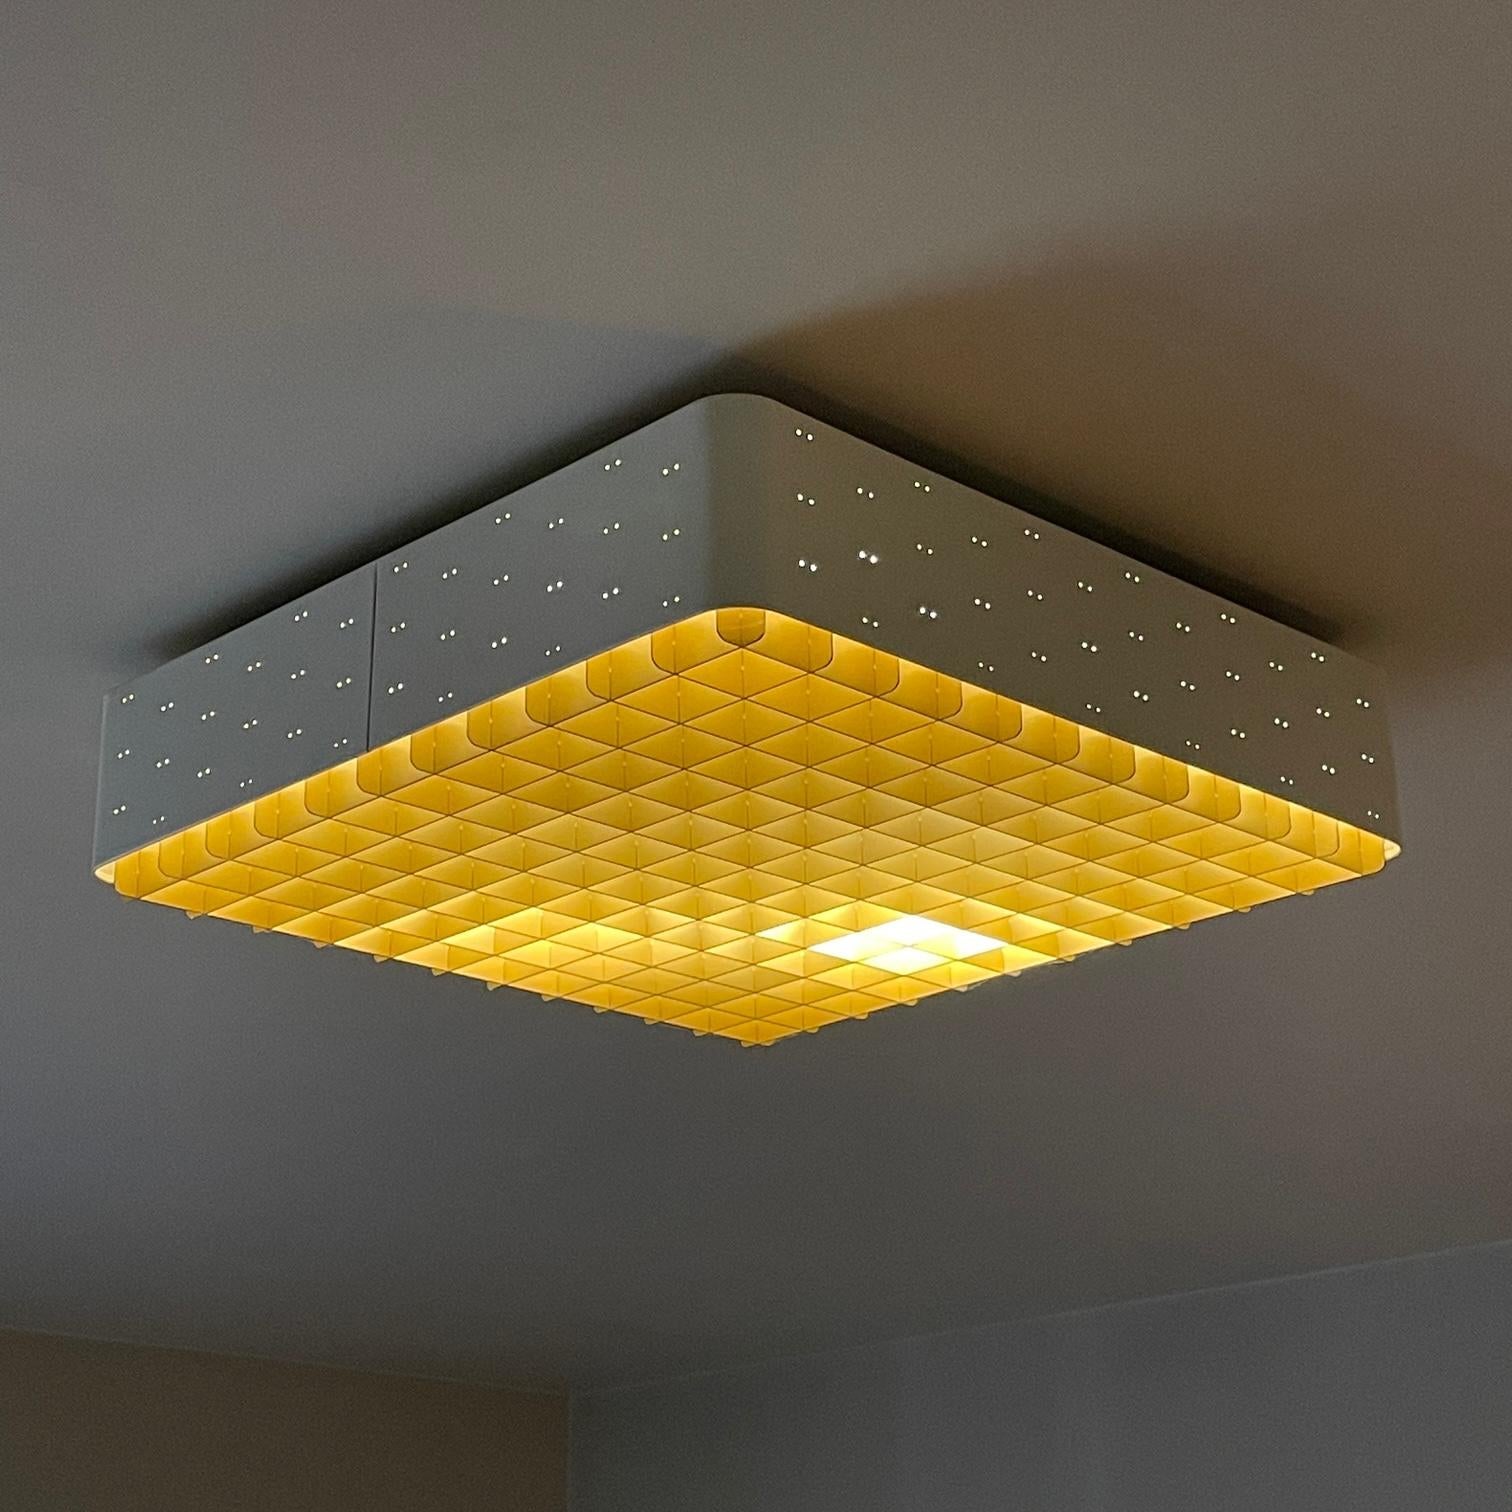 Ready to be hardwired, with normal US 110v voltage. Houses 4 incandescent bulbs. 

This is a large 18x18 square “starry sky” ceiling lamp model #9068 by Paavo Tynell for Lightolier. Lacquered white perforated metal frame, anodized gold grid, and a